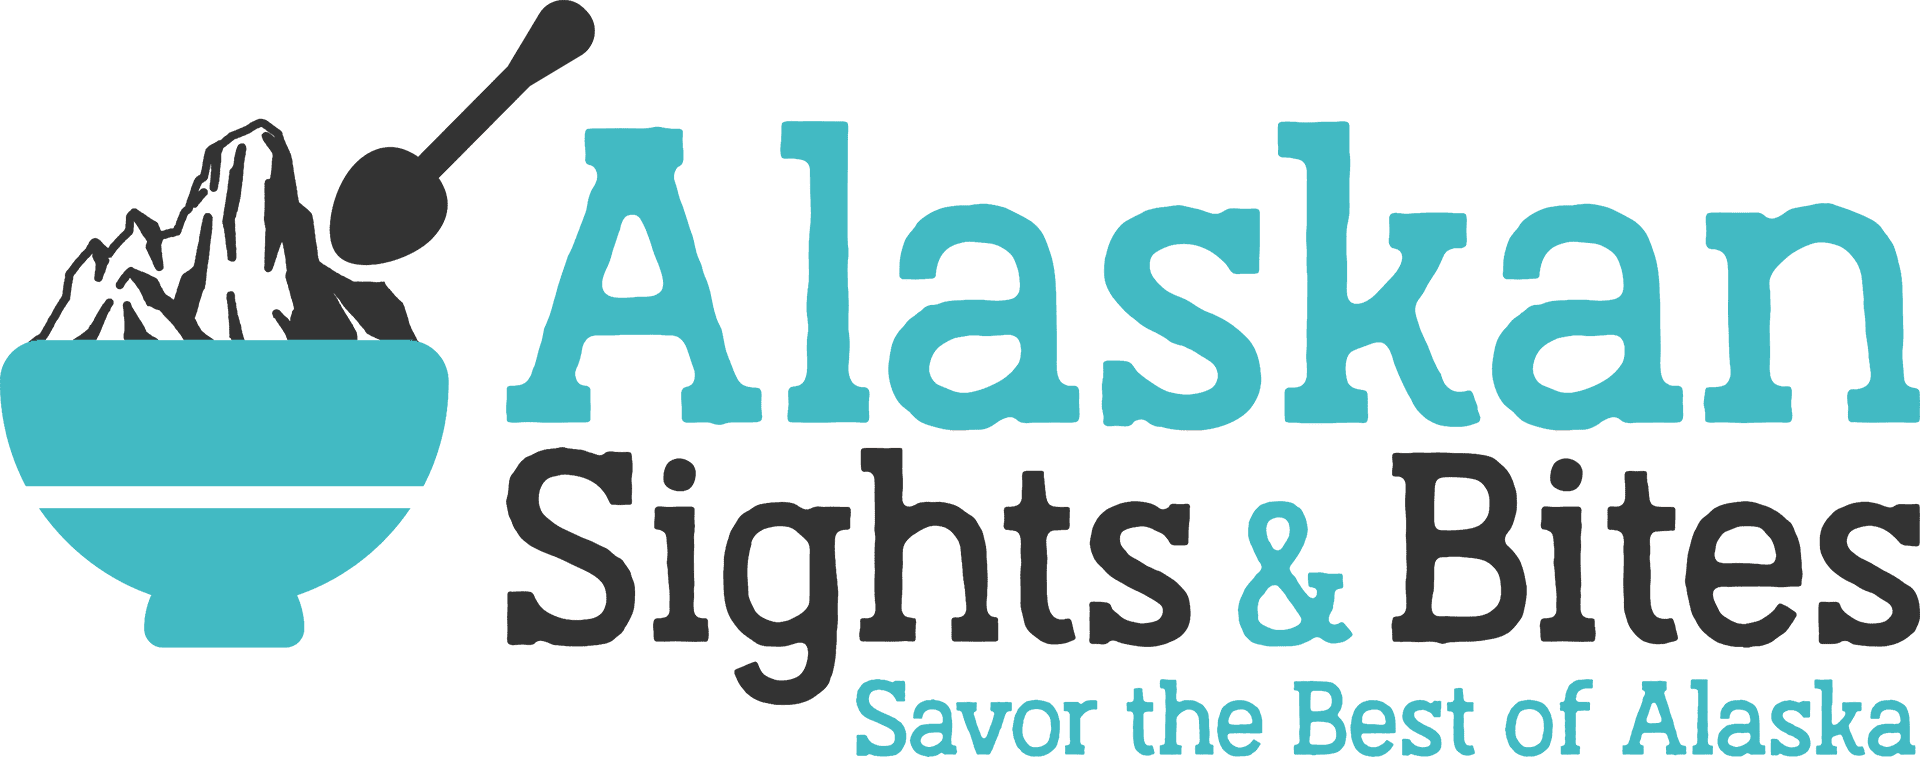 Logo of "Alaskan Sights & Bites" featuring an illustration of a bowl of food with a scoop and the slogan "Savor the best of Alaska on our Guided Anchorage Food Tours